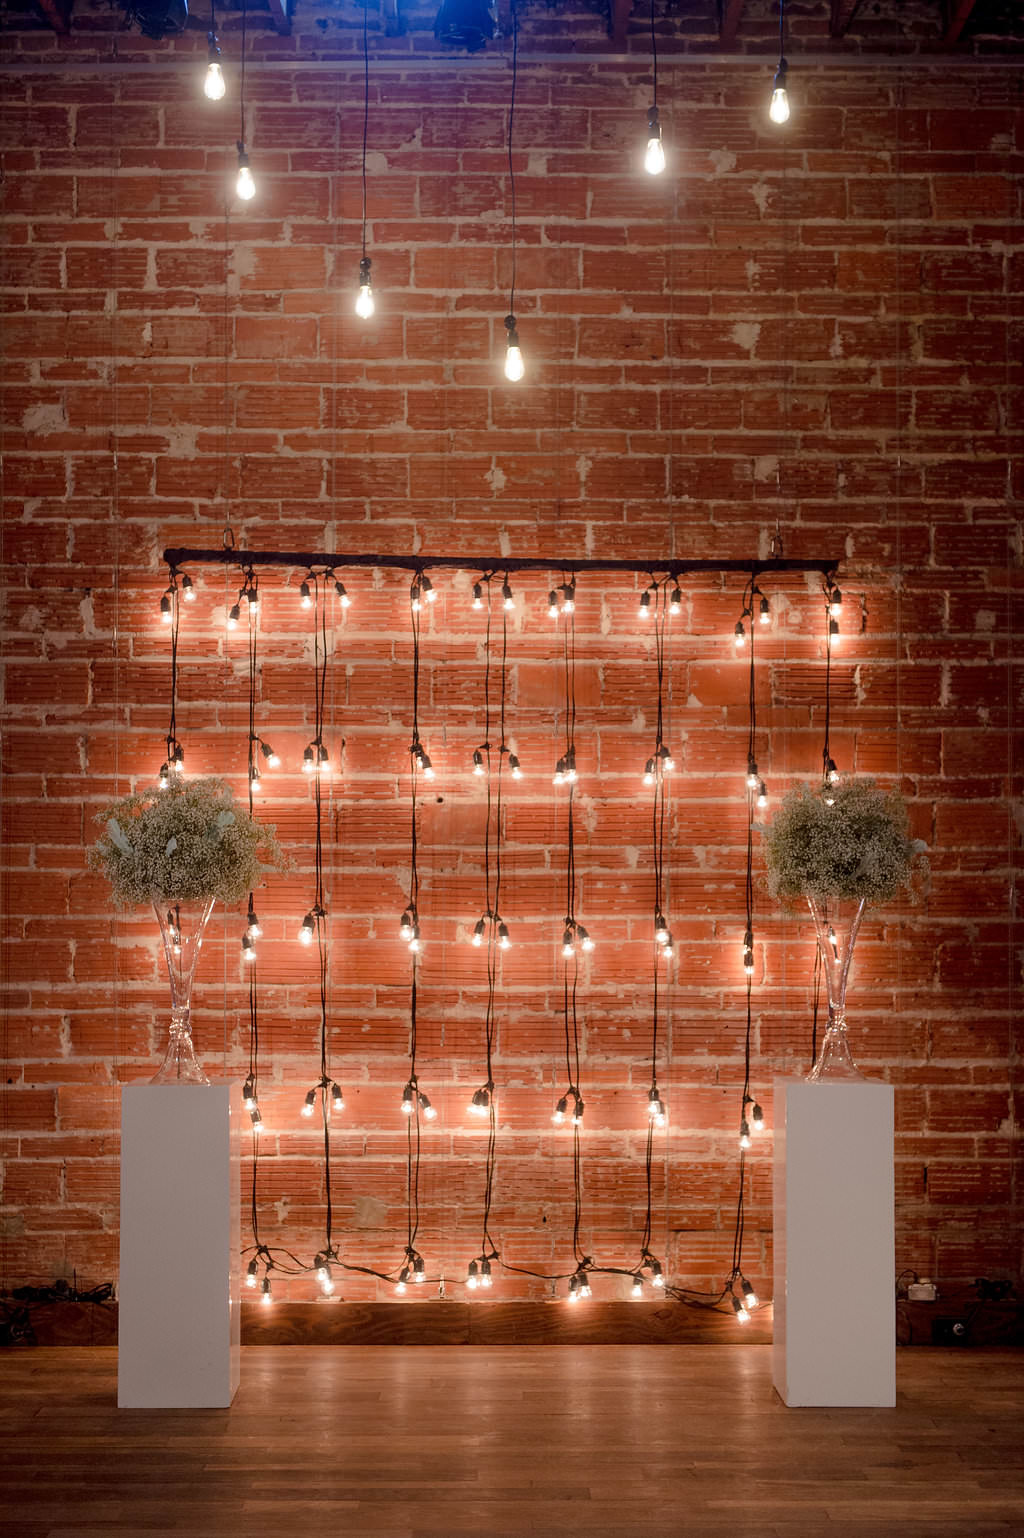 Exposed Brick and Industrial String Lights, White Pedestals with Glass Cylinders and Baby's Breathe | Modern Industrial Wedding Reception Decor Inspiration | Downtown St. Petersburg Wedding Venue NOVA 535 | St. Pete Photographer Marc Edwards Photography